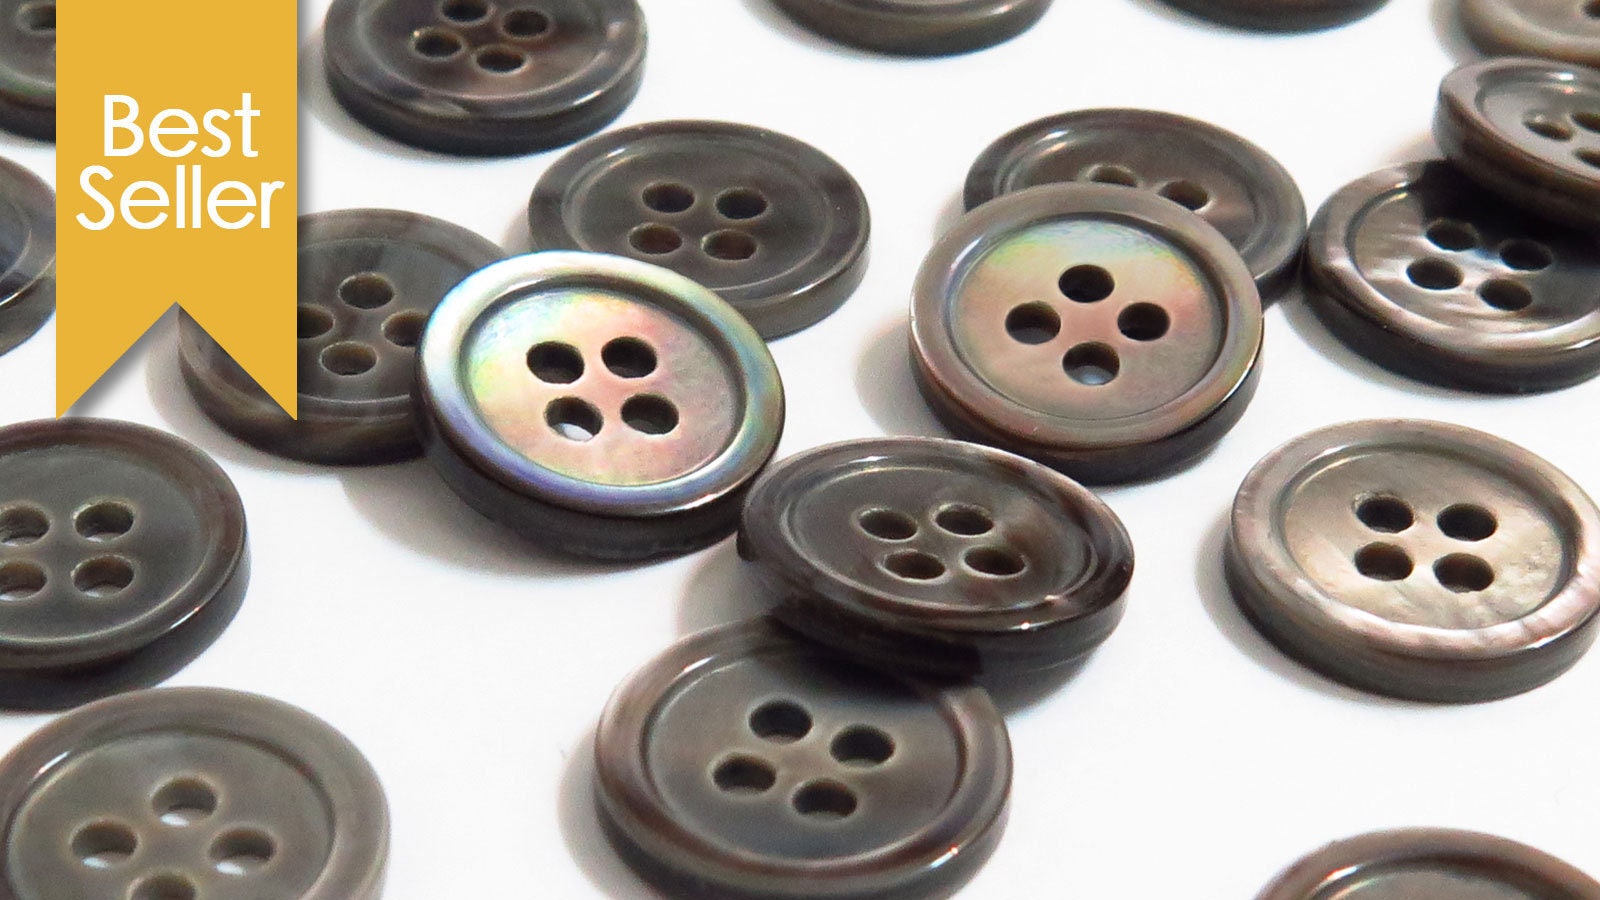 Grey Buttons for Sewing 0.60 inch Button for Crafts 2 Hole Smoke Grey  Buttonы 24L Fish Eye Sewing Buttons Round Buttons Plastic Buttons Design  Buttons